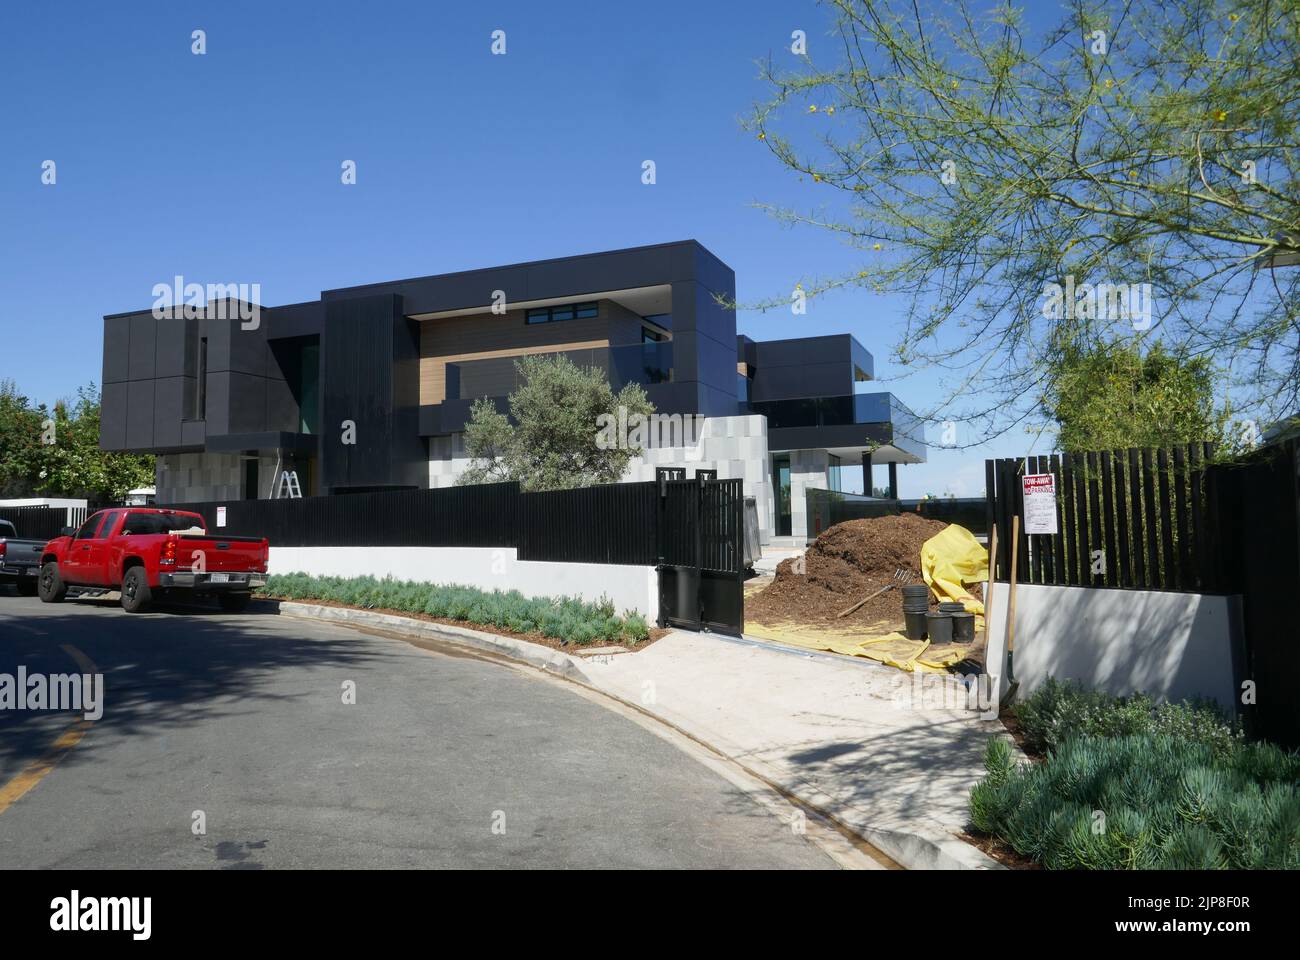 Beverly Hills, California, USA 15th August 2022 Actress Gloria Swanson's Former Home/house on August 15, 2022 in Beverly Hills, California, USA. Photo by Barry King/Alamy Stock Photo Stock Photo